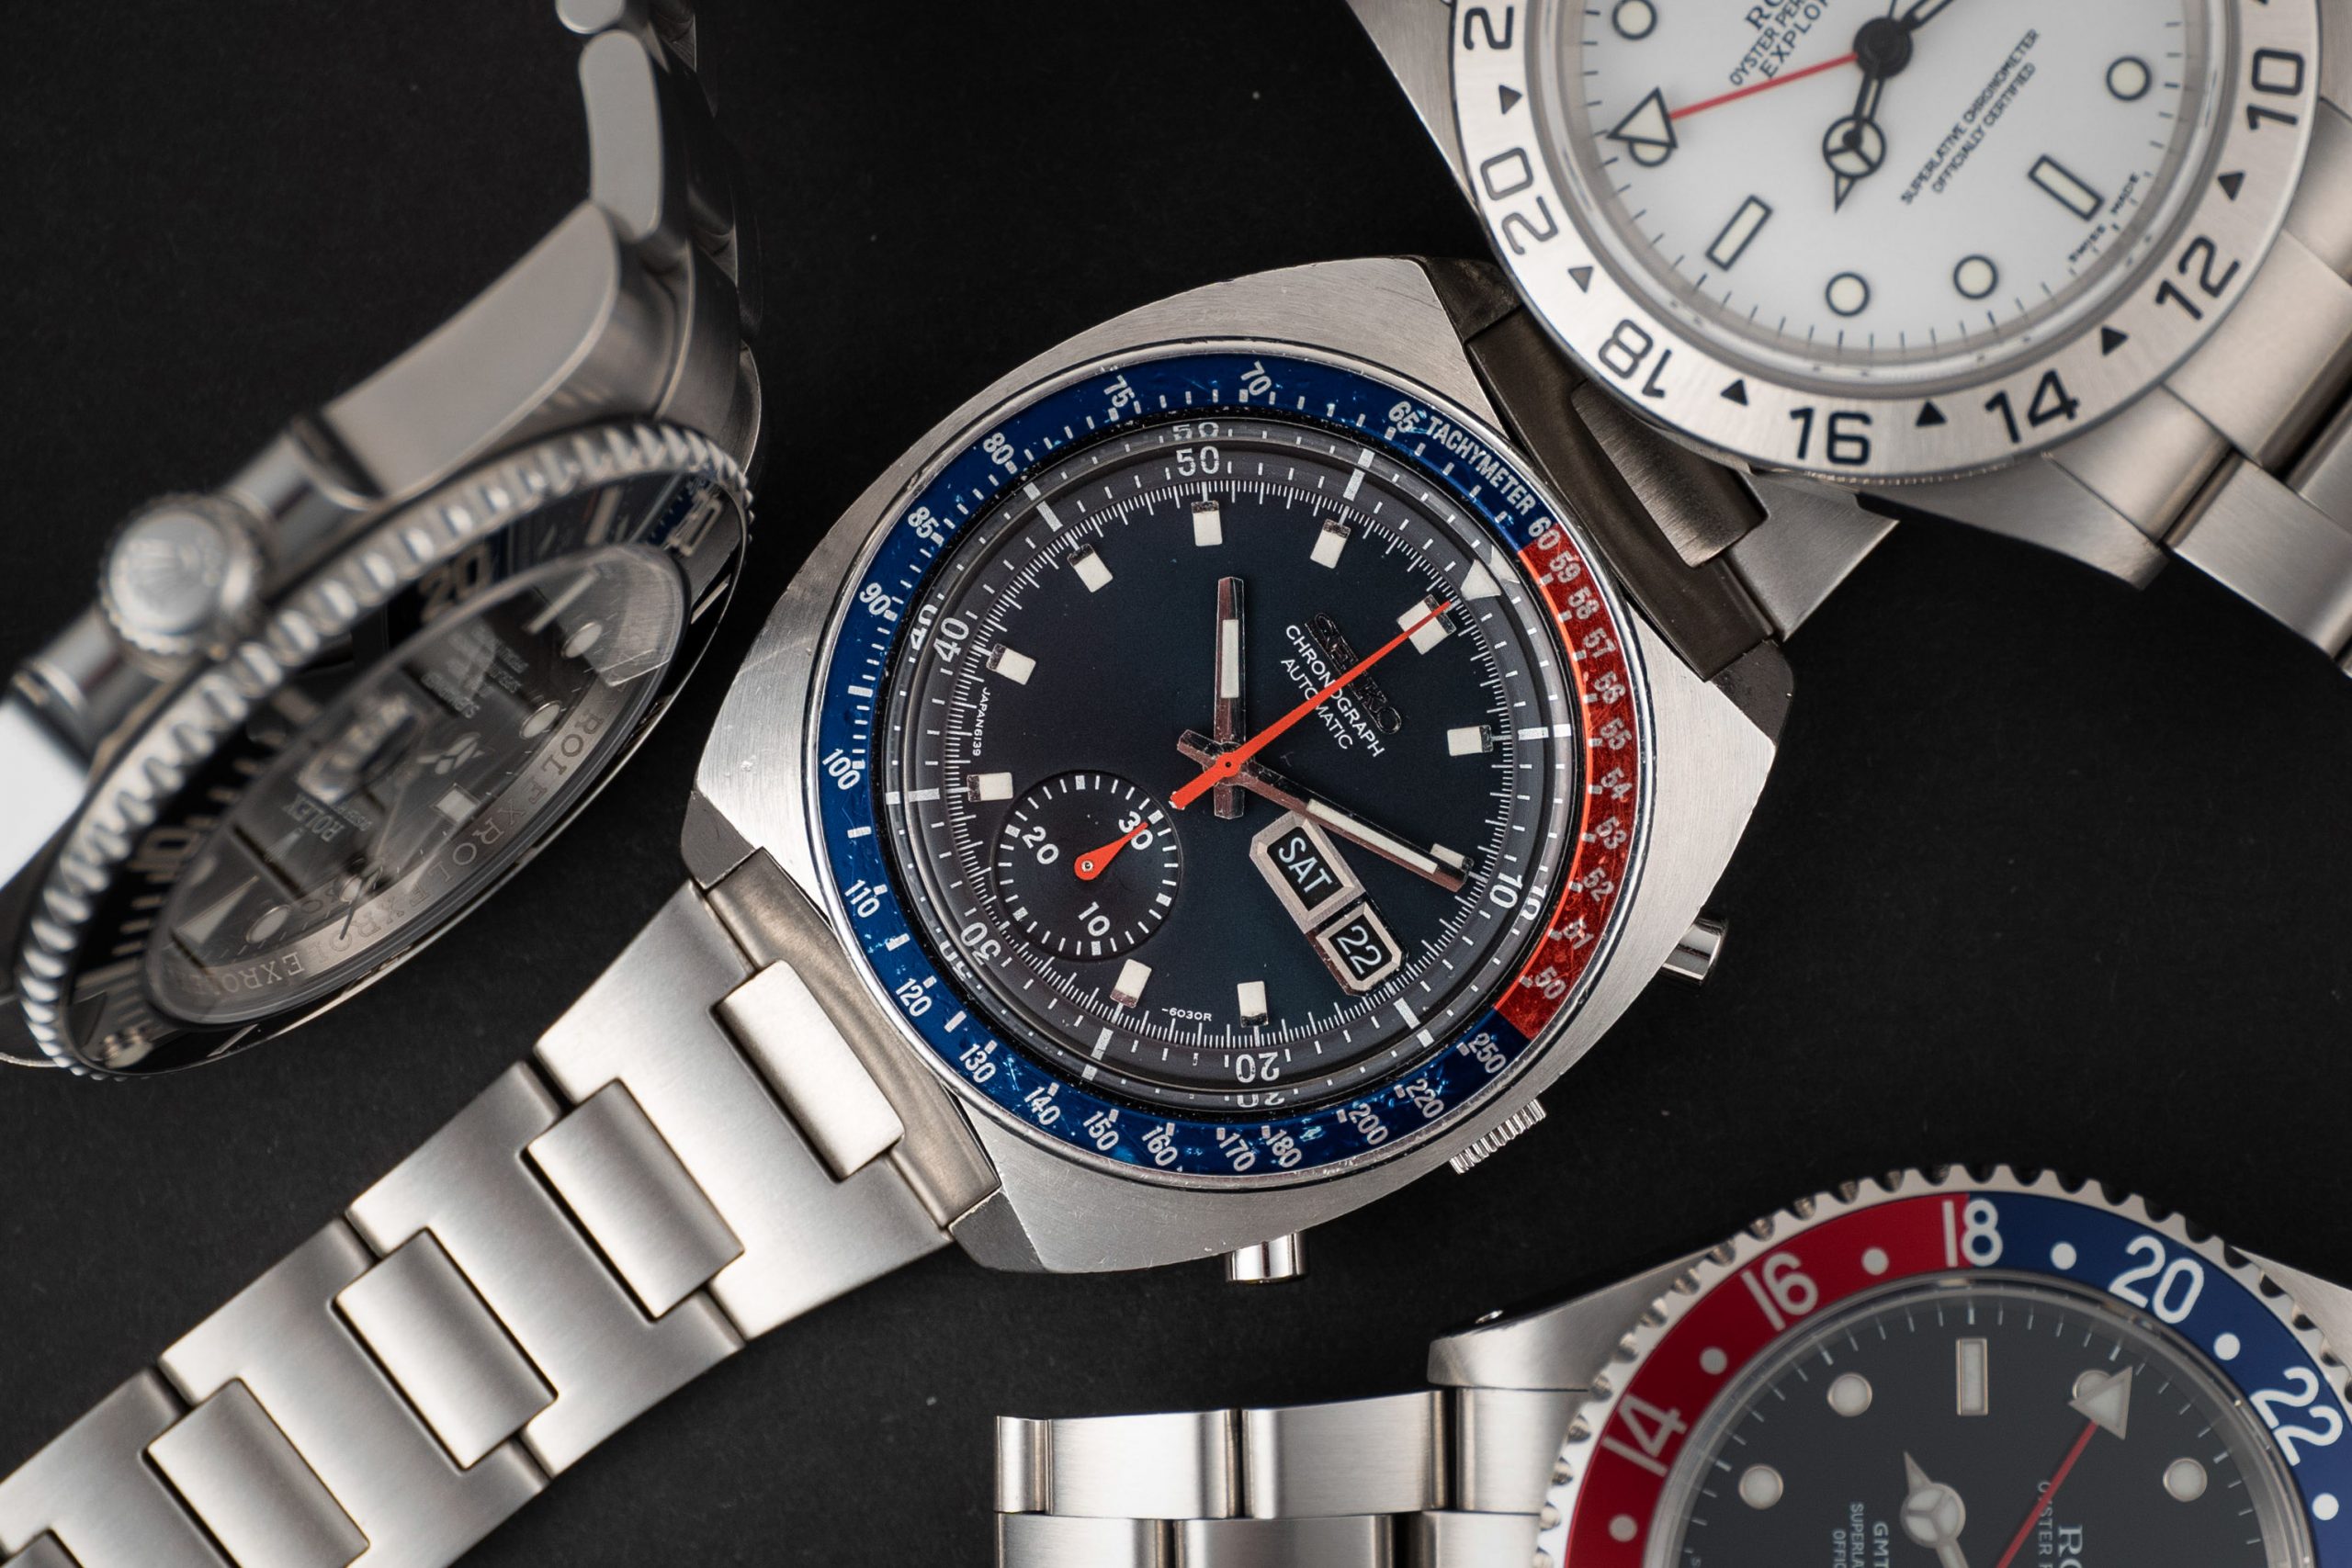 Mange farlige situationer I navnet Disciplinære Curating The Collection - A Vintage Seiko Speedtimer 6139 Pogue Chronograph  Ousts a Ceramic Daytona From a Rolex Collection